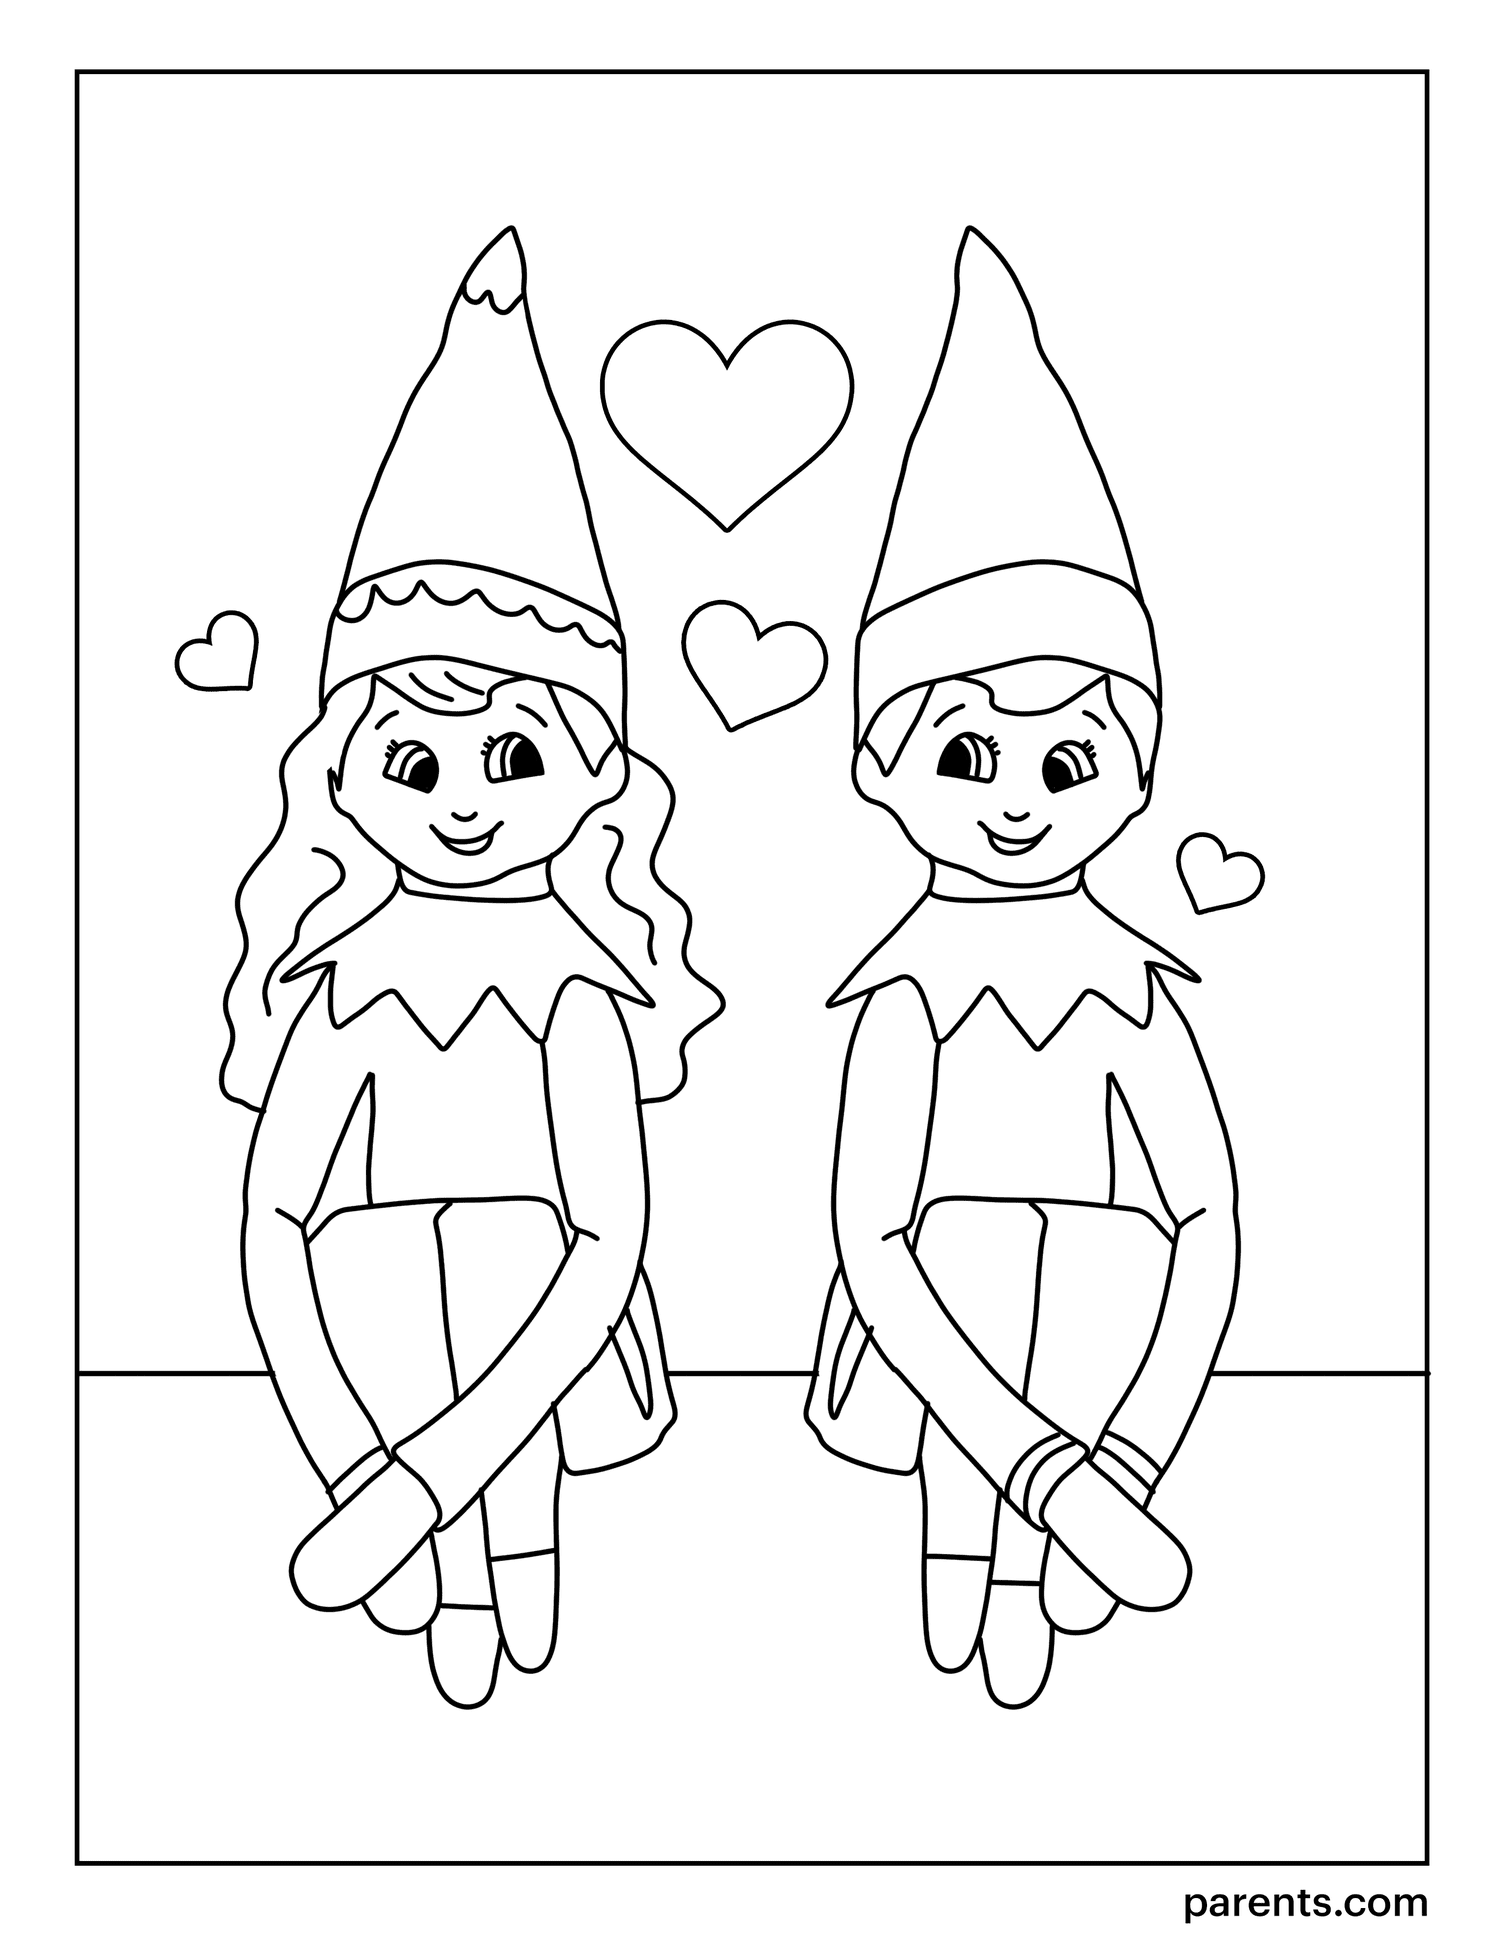 Printable Elf On The Shelf Coloring Pages - Printable Word Searches